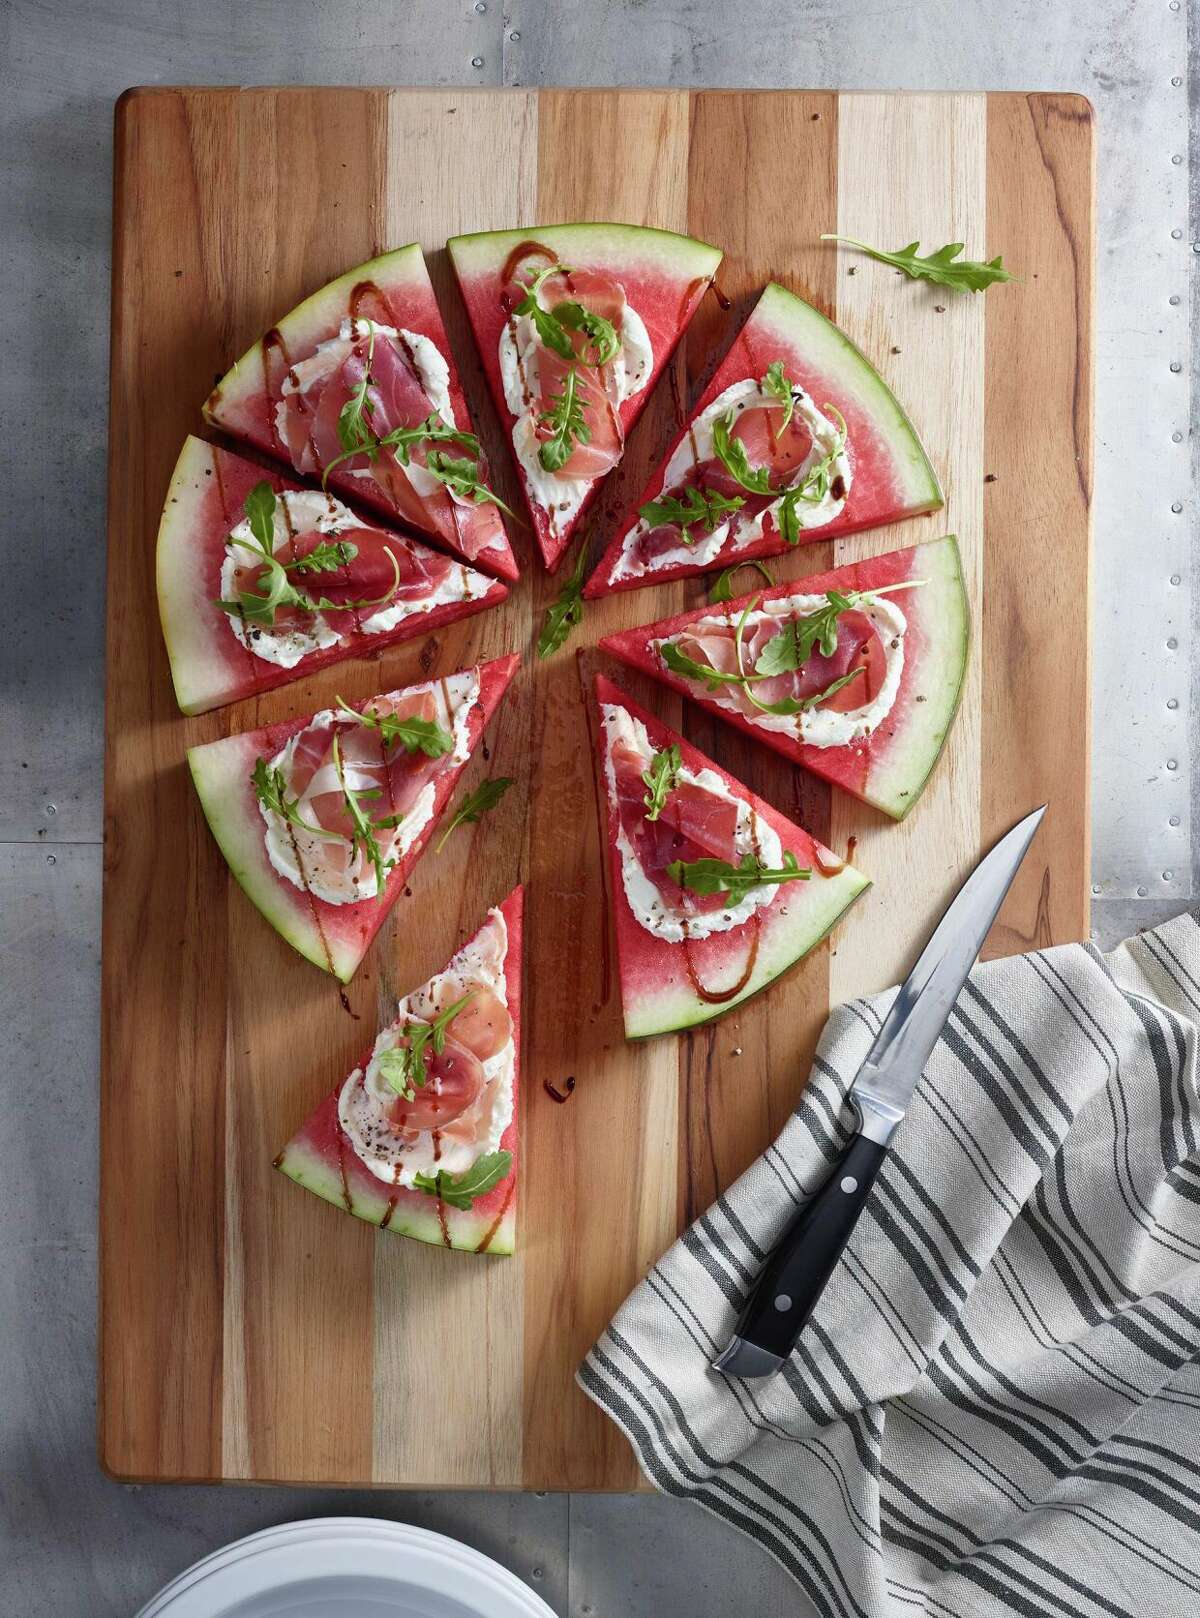 Savory Watermelon Pizza: Paired with savory ingredients like prosciutto and goat cheese, this savory “pizza” skips the bread to make watermelon the new star.